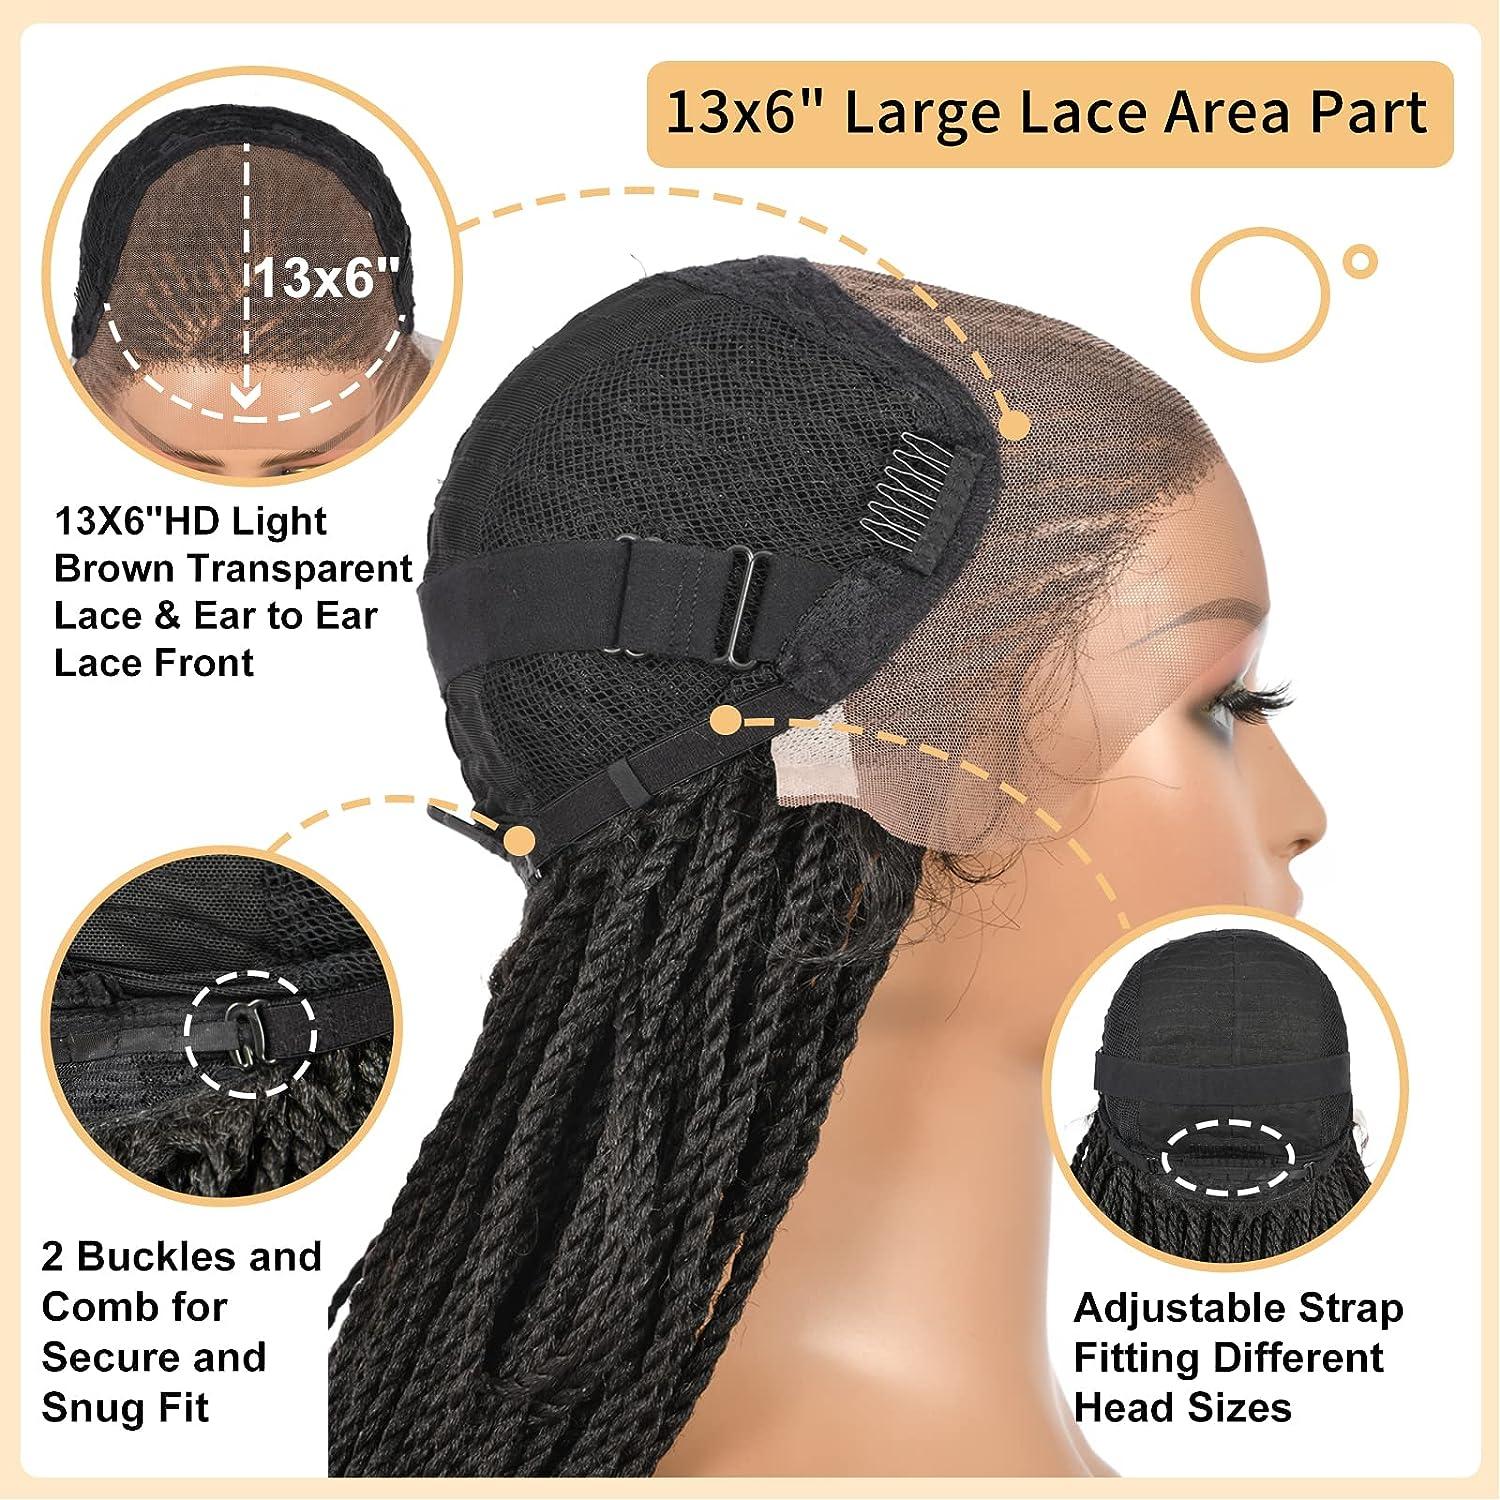 Brinbea 13X6 Lace Front Braided Wigs for Women Premium Synthetic